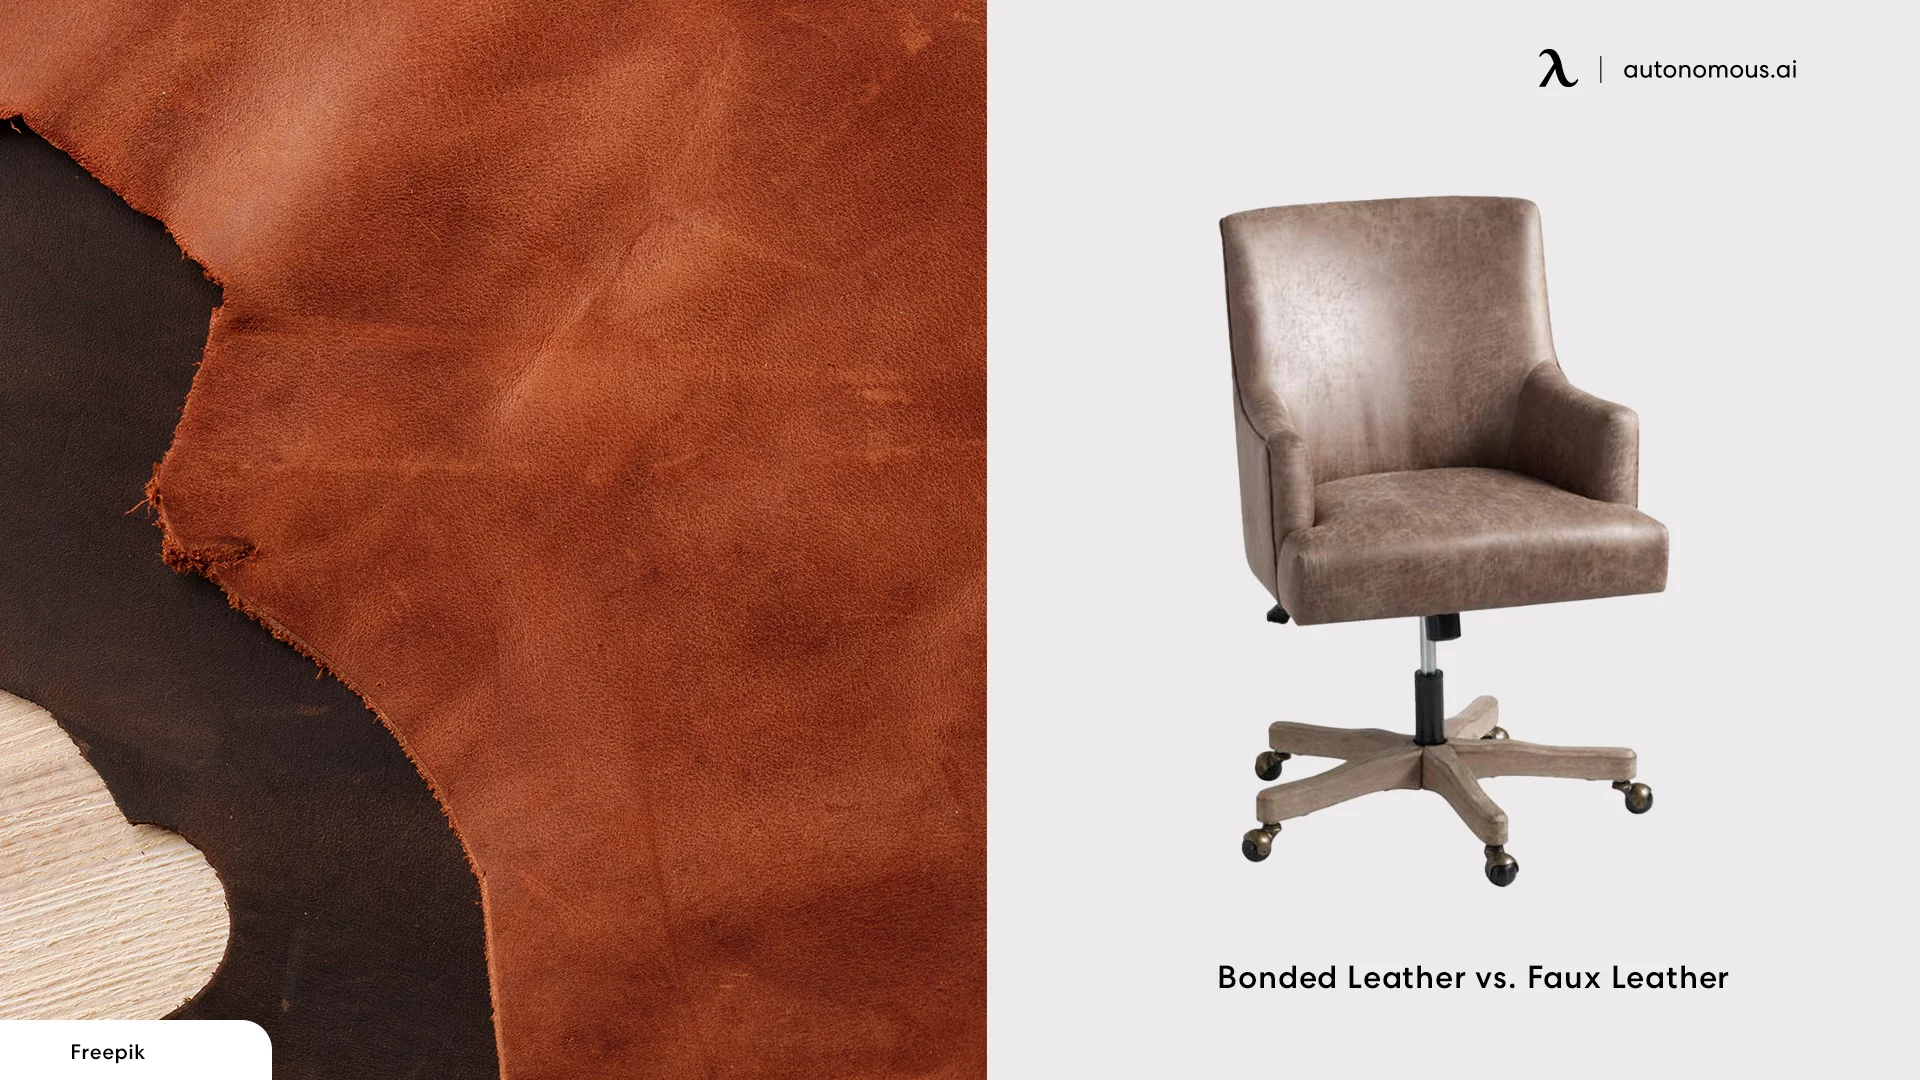 Bonded Leather vs. Faux Leather: Which is Better to Choose?